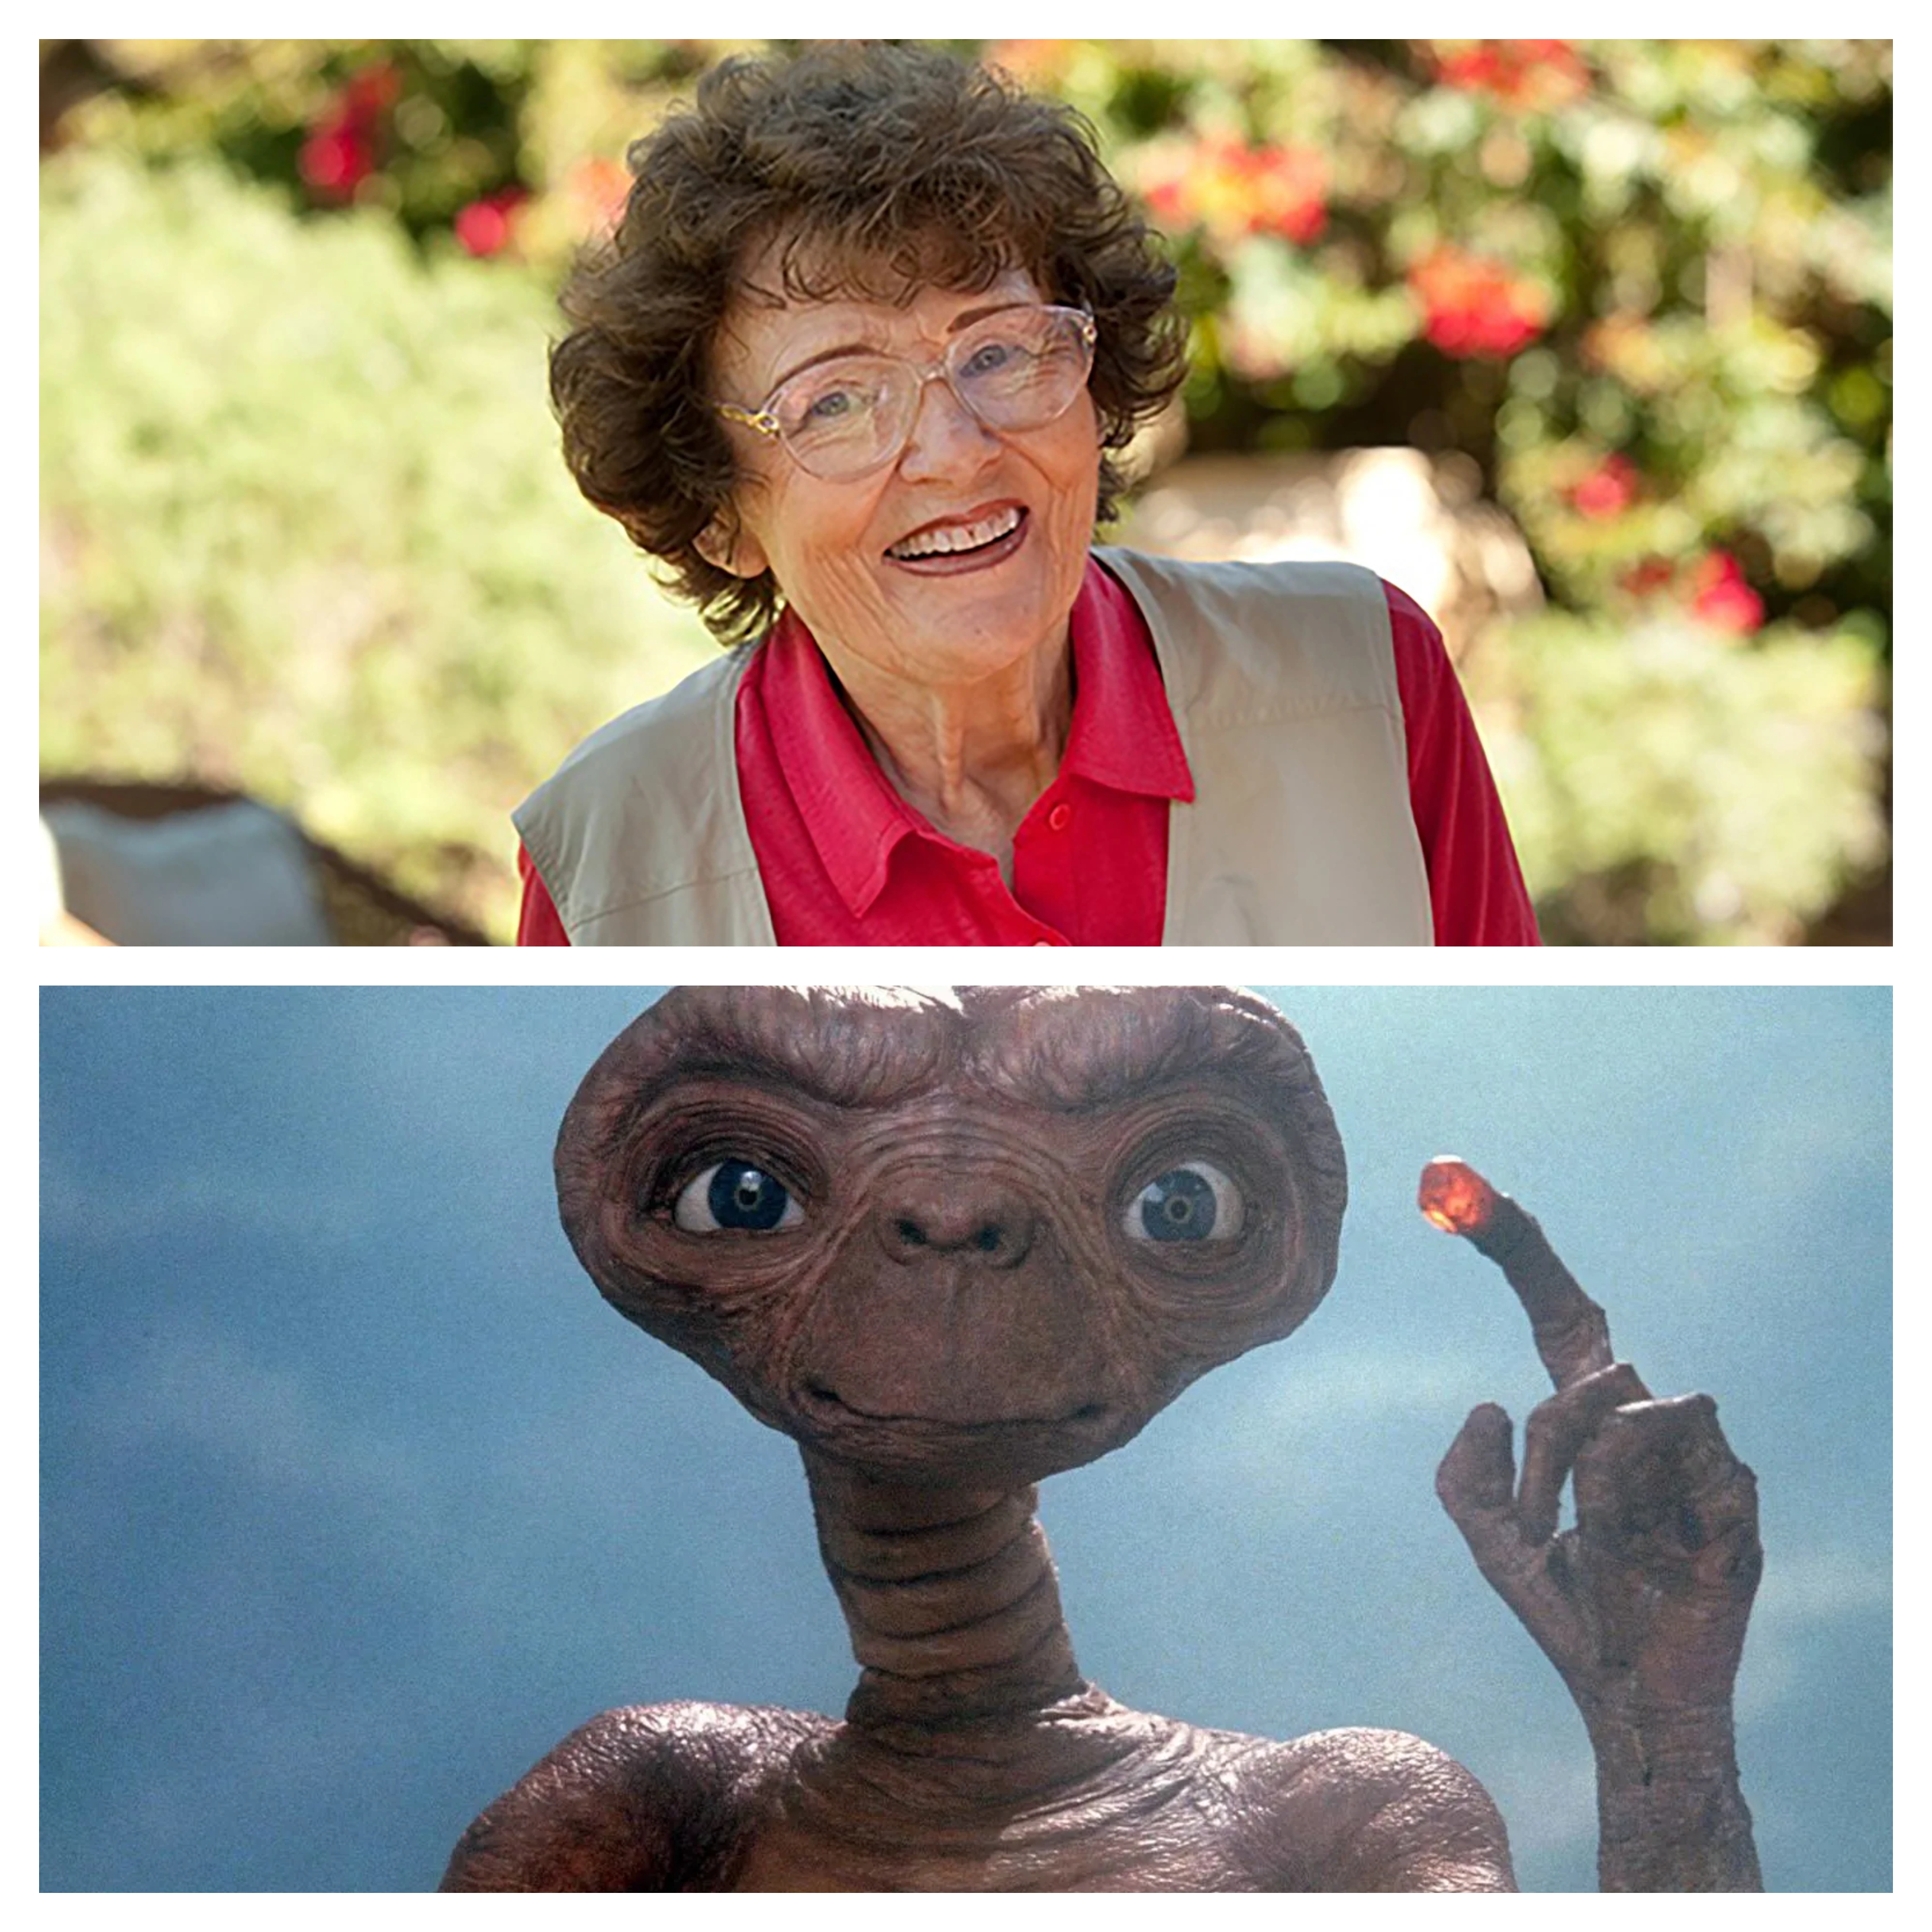 Which Actress Contributed To Developing The Voice Of E.T. The Extra-Terrestrial?